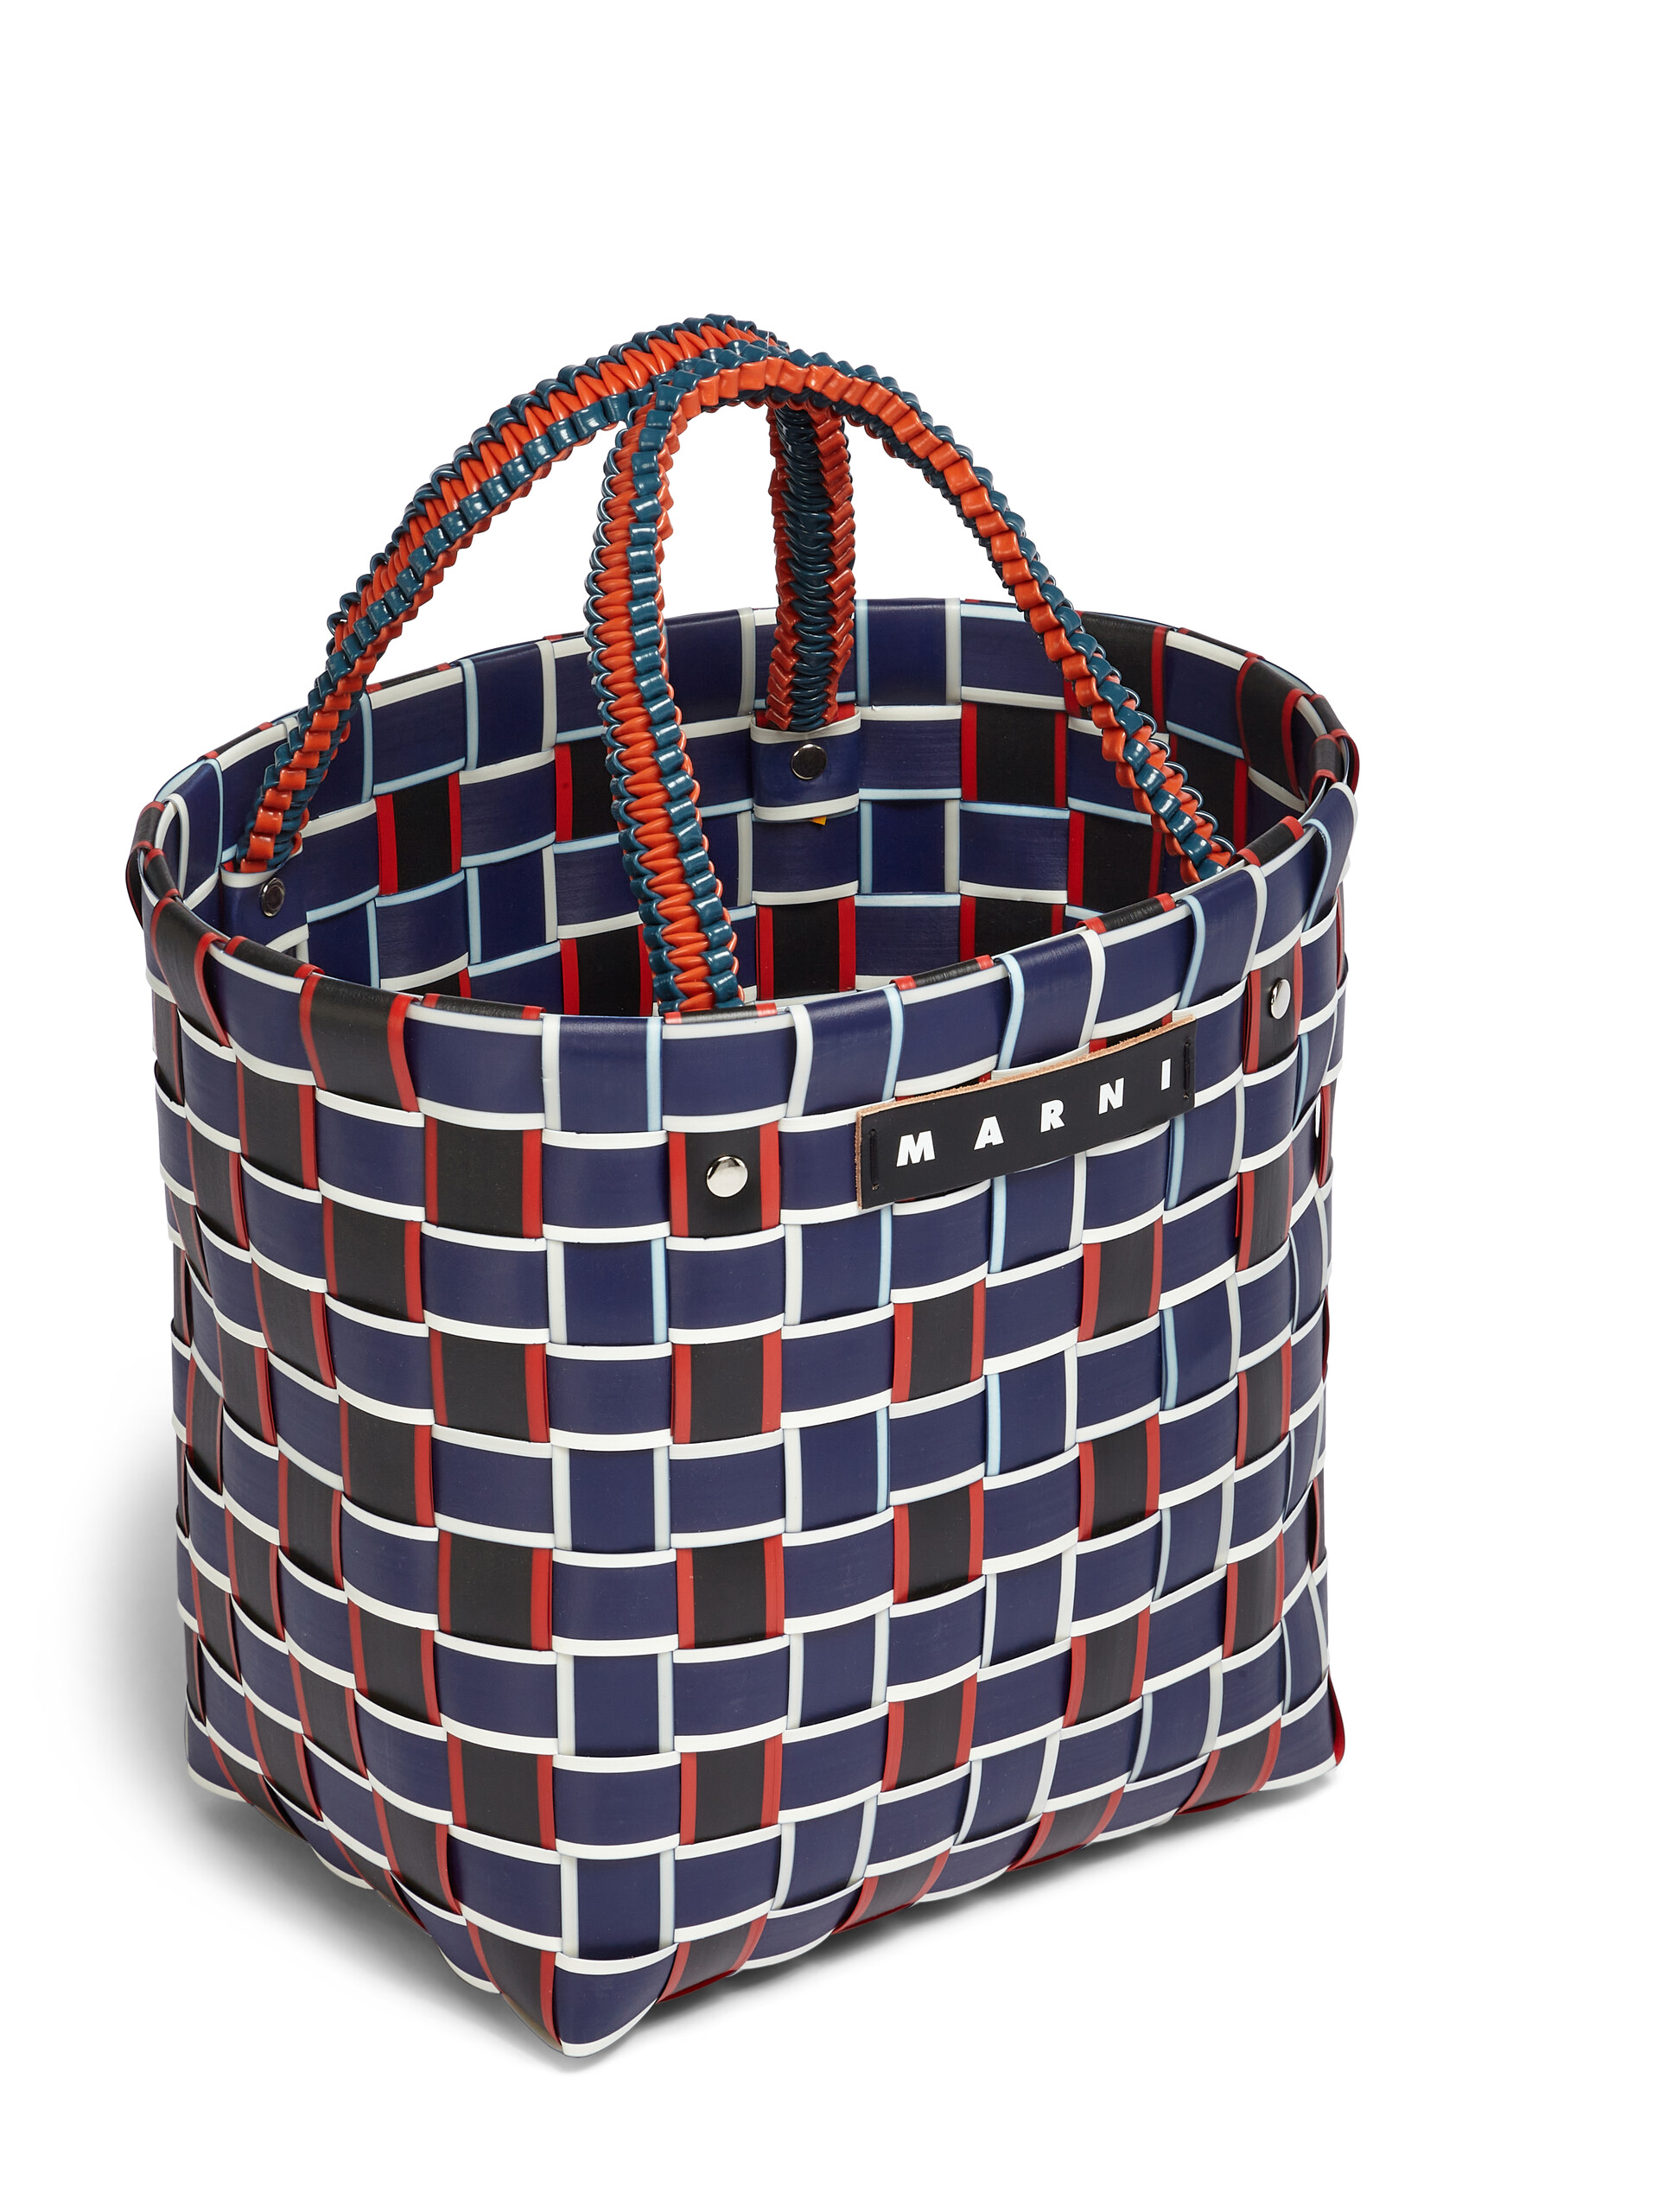 MARNI MARKET TAPE BASKET bag in orange and black woven material - Shopping Bags - Image 4